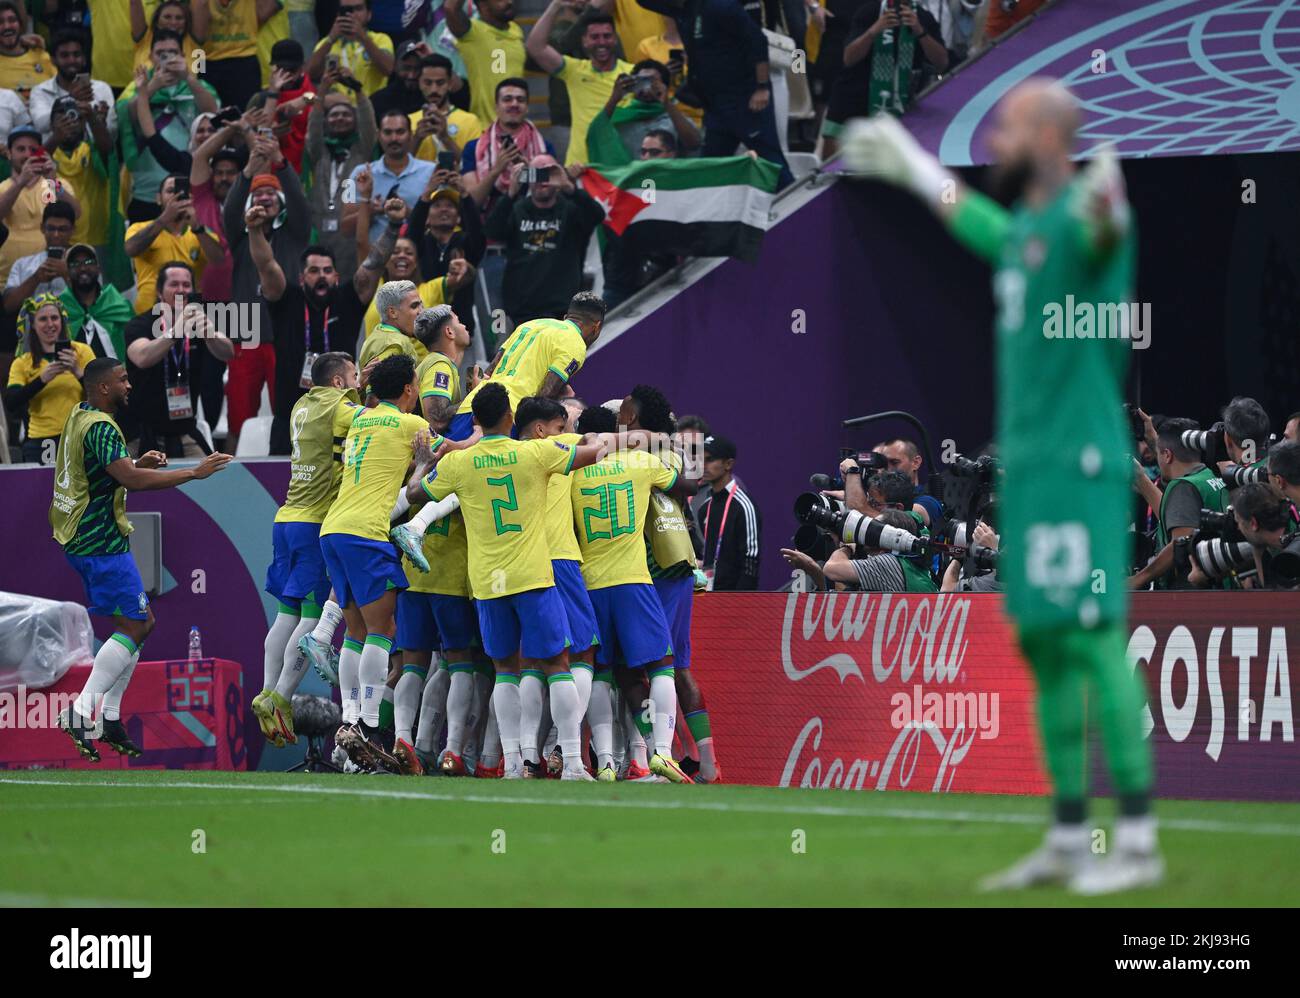 Lusail, Qatar. 24th Nov, 2022. Soccer: World Cup, Brazil - Serbia, Preliminary Round, Group G, Matchday 1, Lusail Iconic Stadium, Brazil's players cheer for the 2:0. In the foreground on the right, goalkeeper Ederson of Brazil spreads his arms in jubilation. Credit: Robert Michael/dpa/Alamy Live News Stock Photo